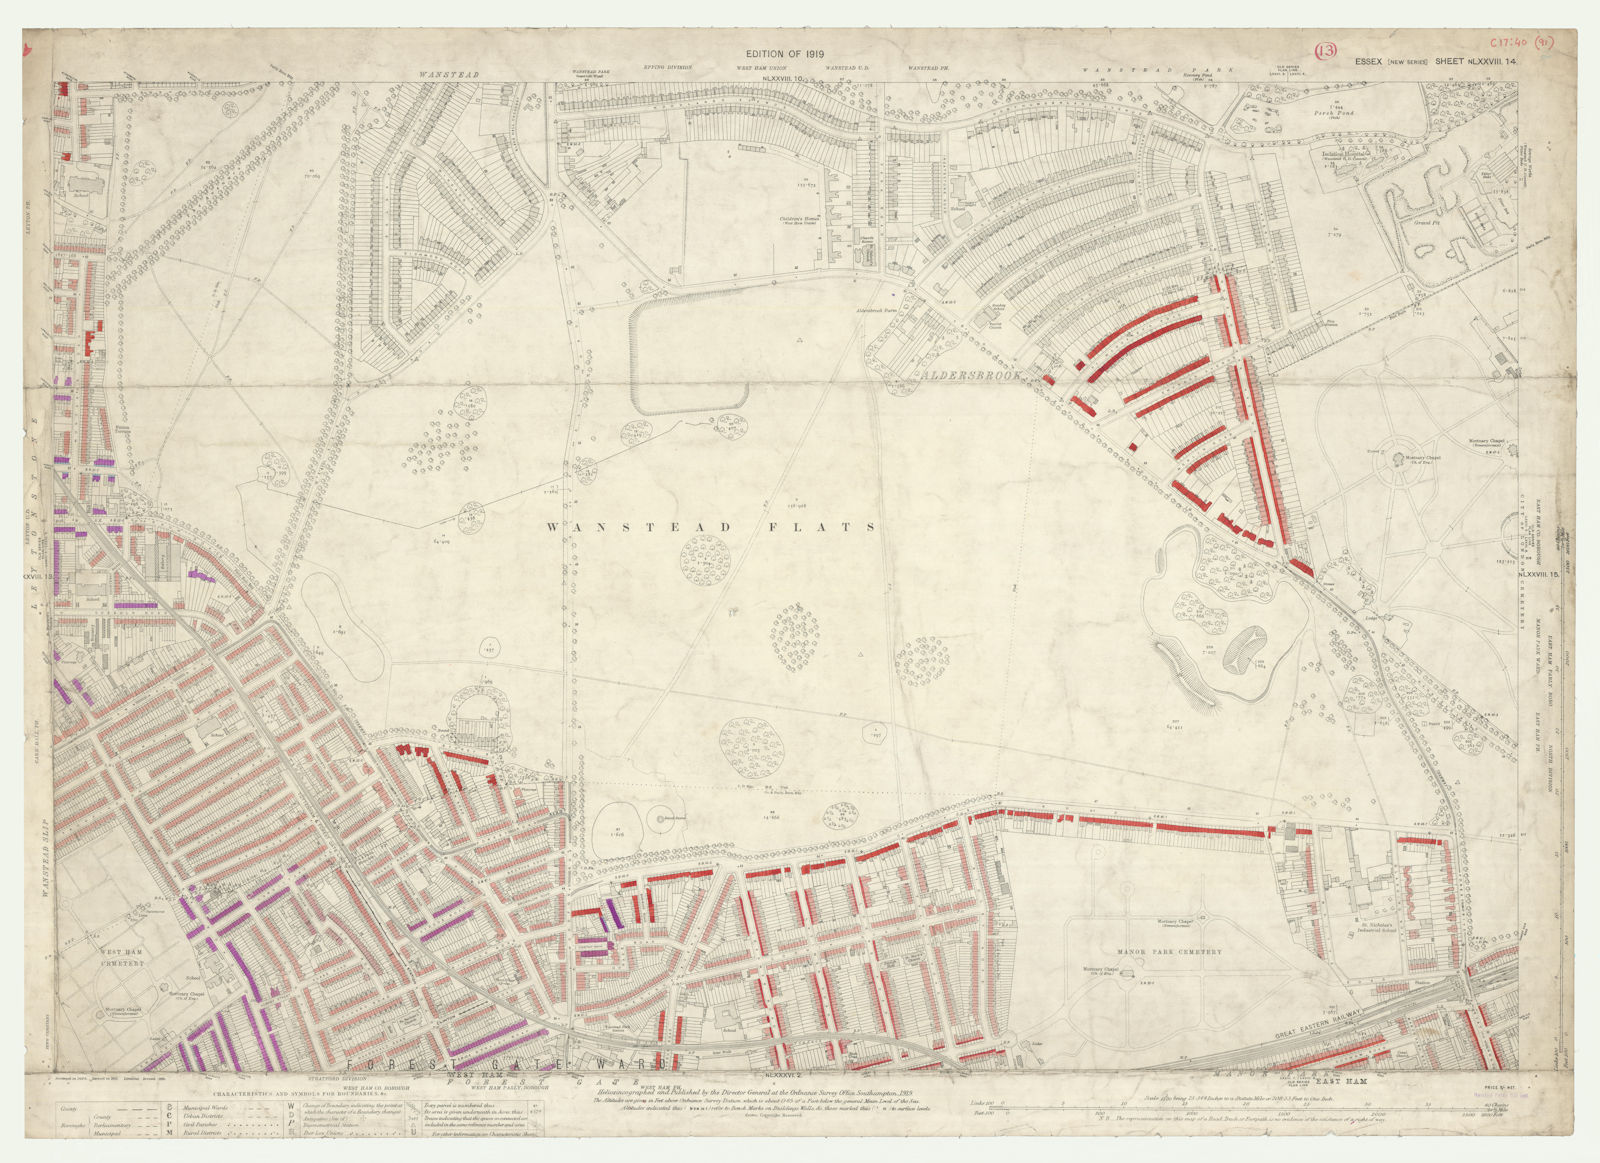 LSE POVERTY OS PROOF MAP Wanstead Flats - Aldersbrook - Forest Gate 1928